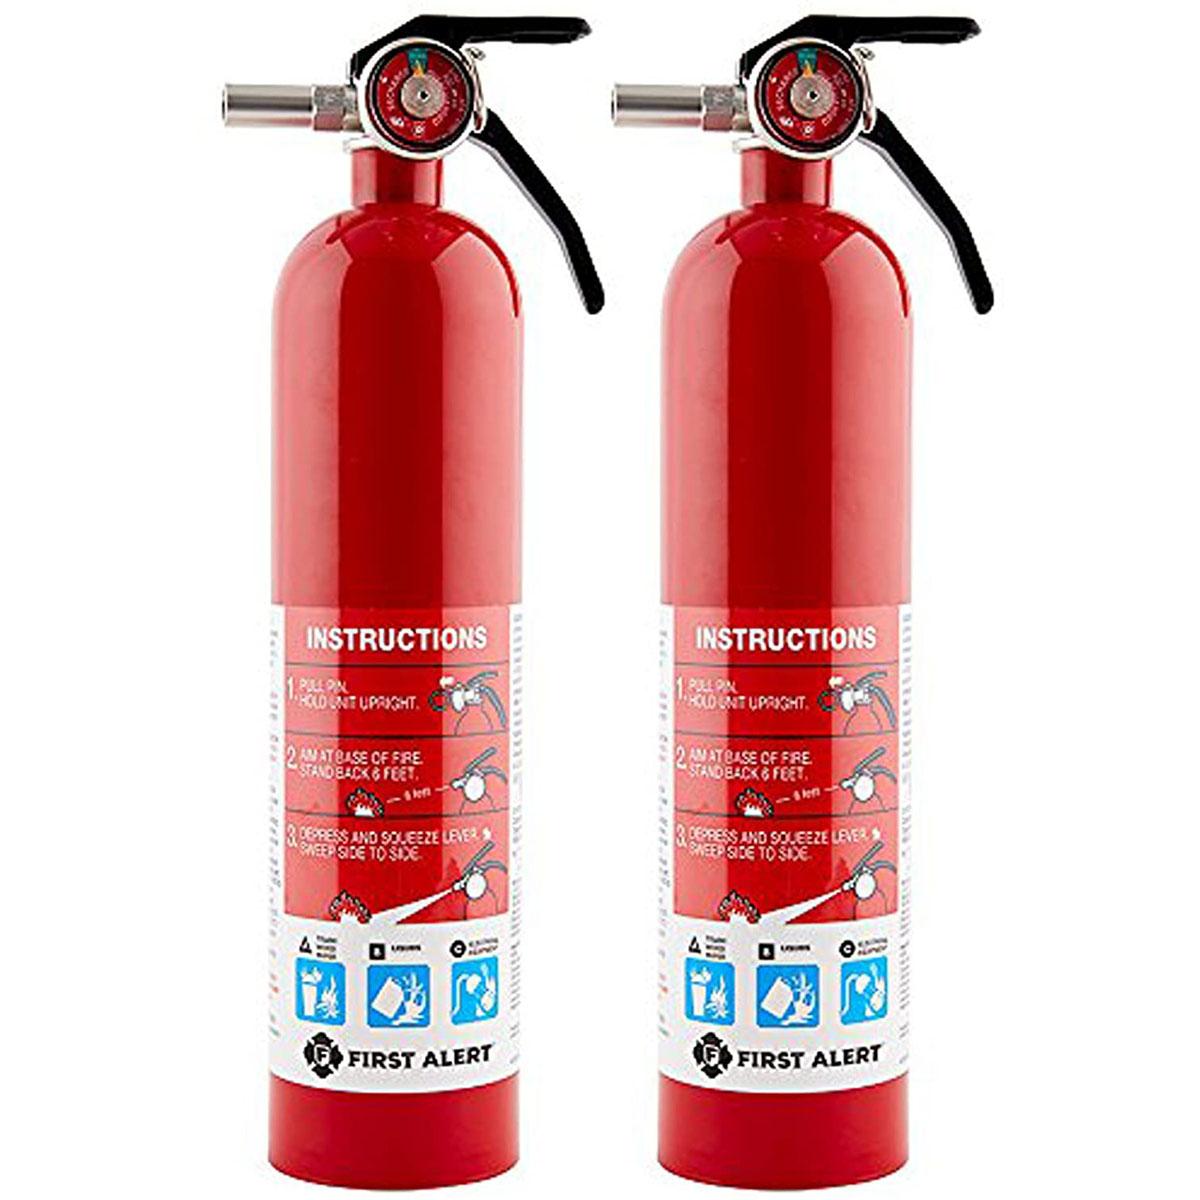 2 First Alert Home1 Rechargeable Standard Home Fire Extinguisher for $29.99 Shipped